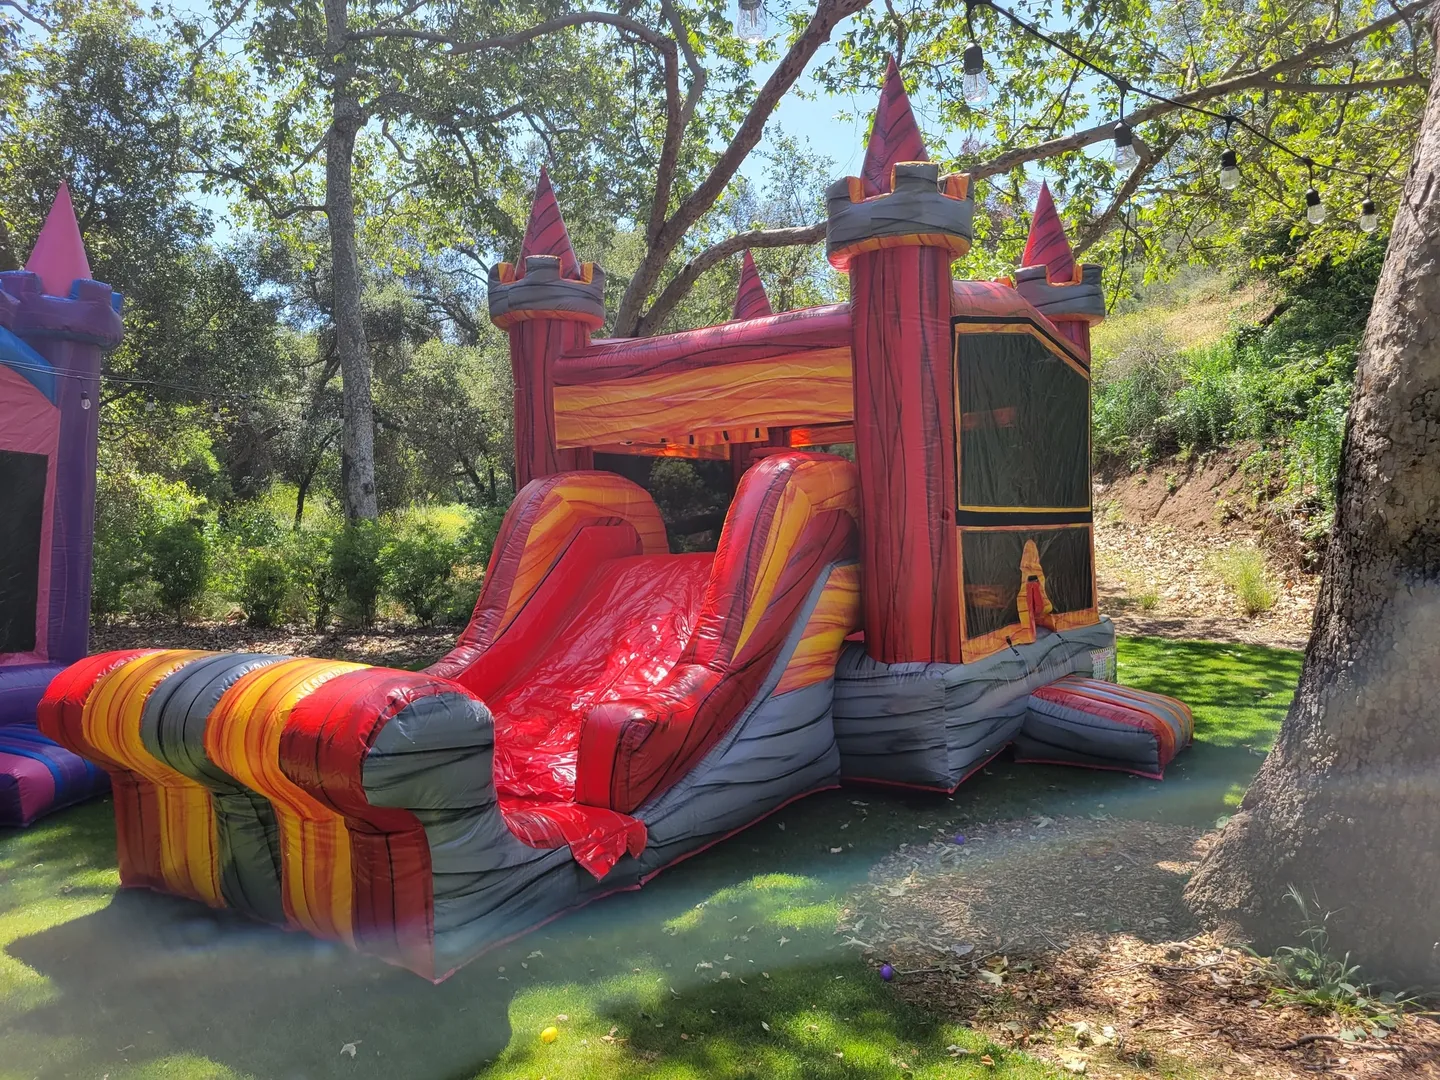 A red and yellow inflatable castle with slide.